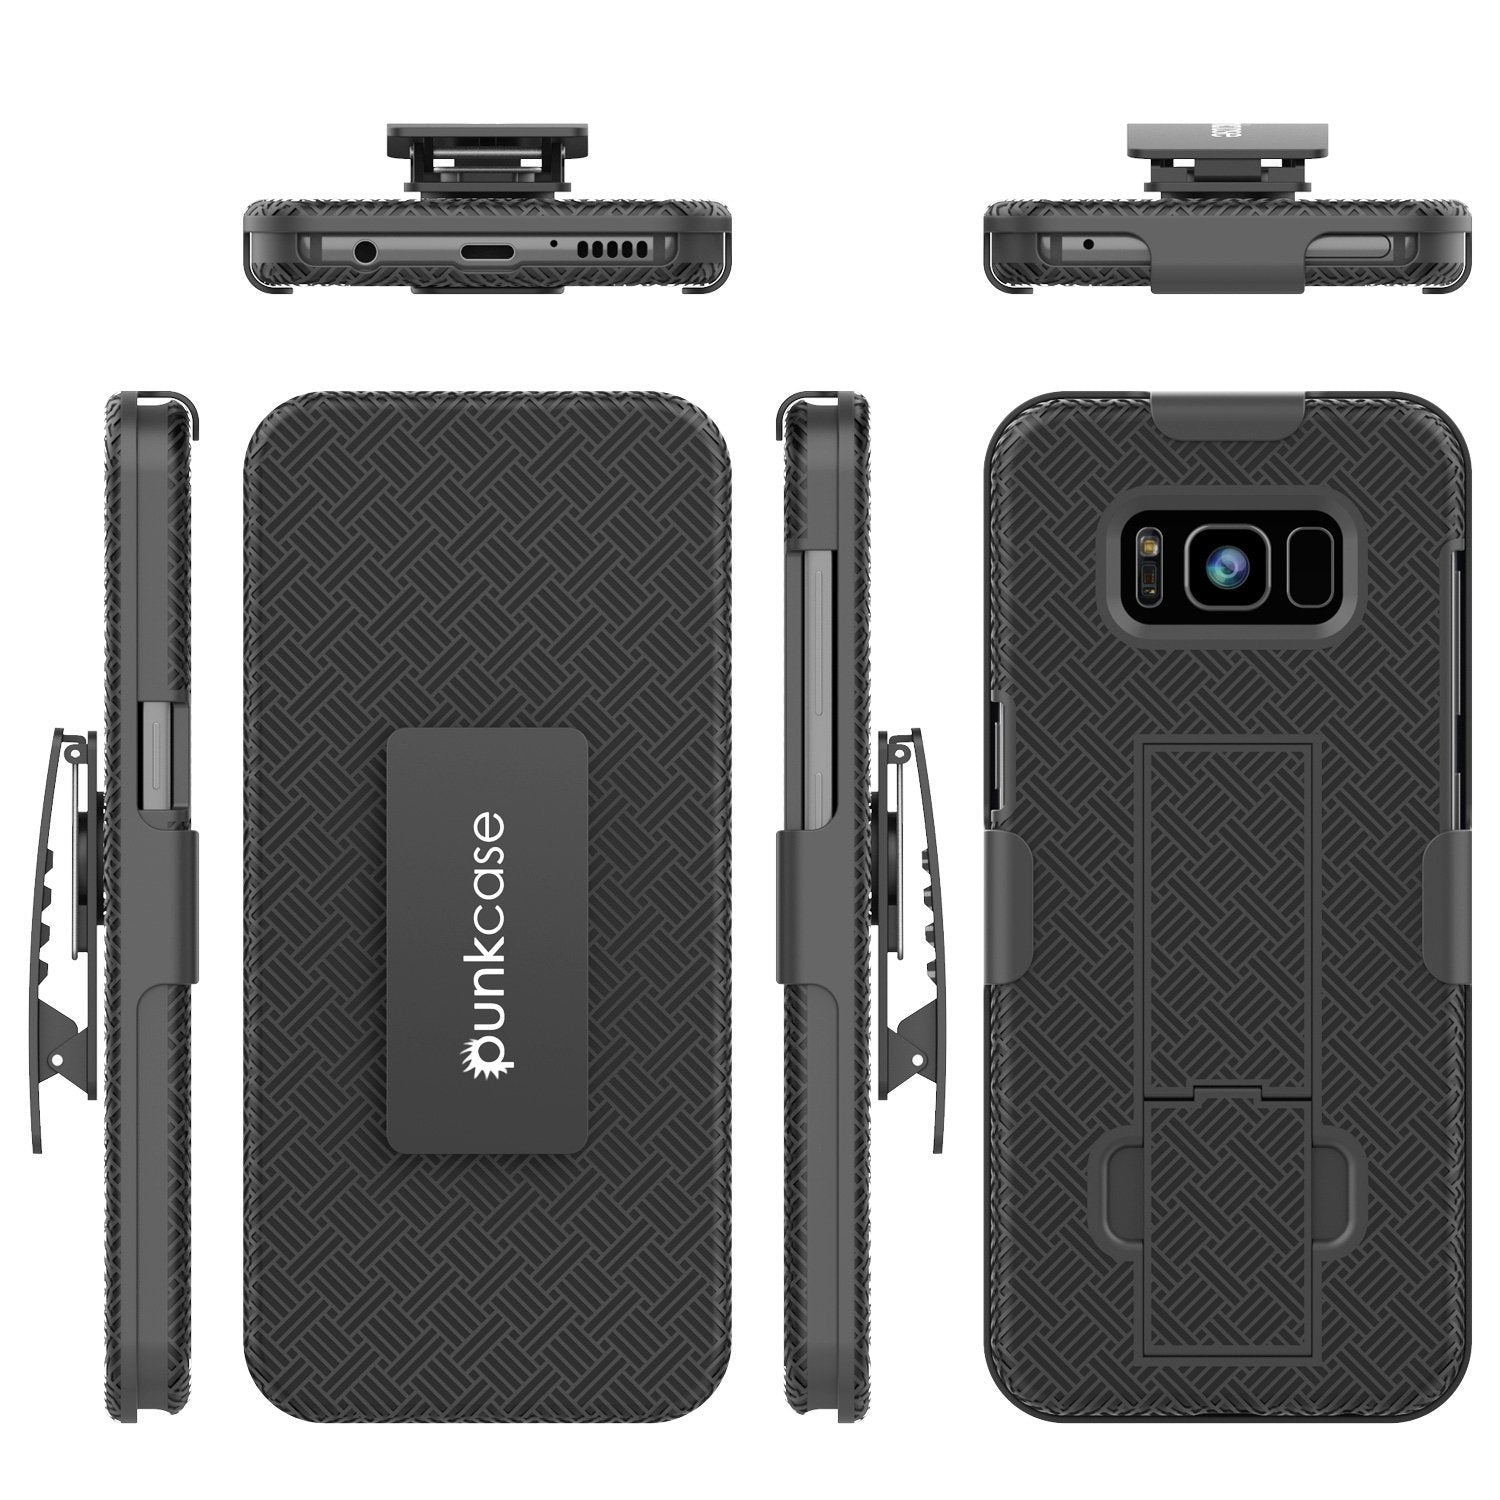 Punkcase Galaxy S8+ Plus Case, With PunkShield Glass Screen Protector, Holster Belt Clip & Built-In Kickstand Non-Slip Dual Layer Hybrid TPU Full Body Protection for Samsung S8 Plus Edge [Black] - PunkCase NZ